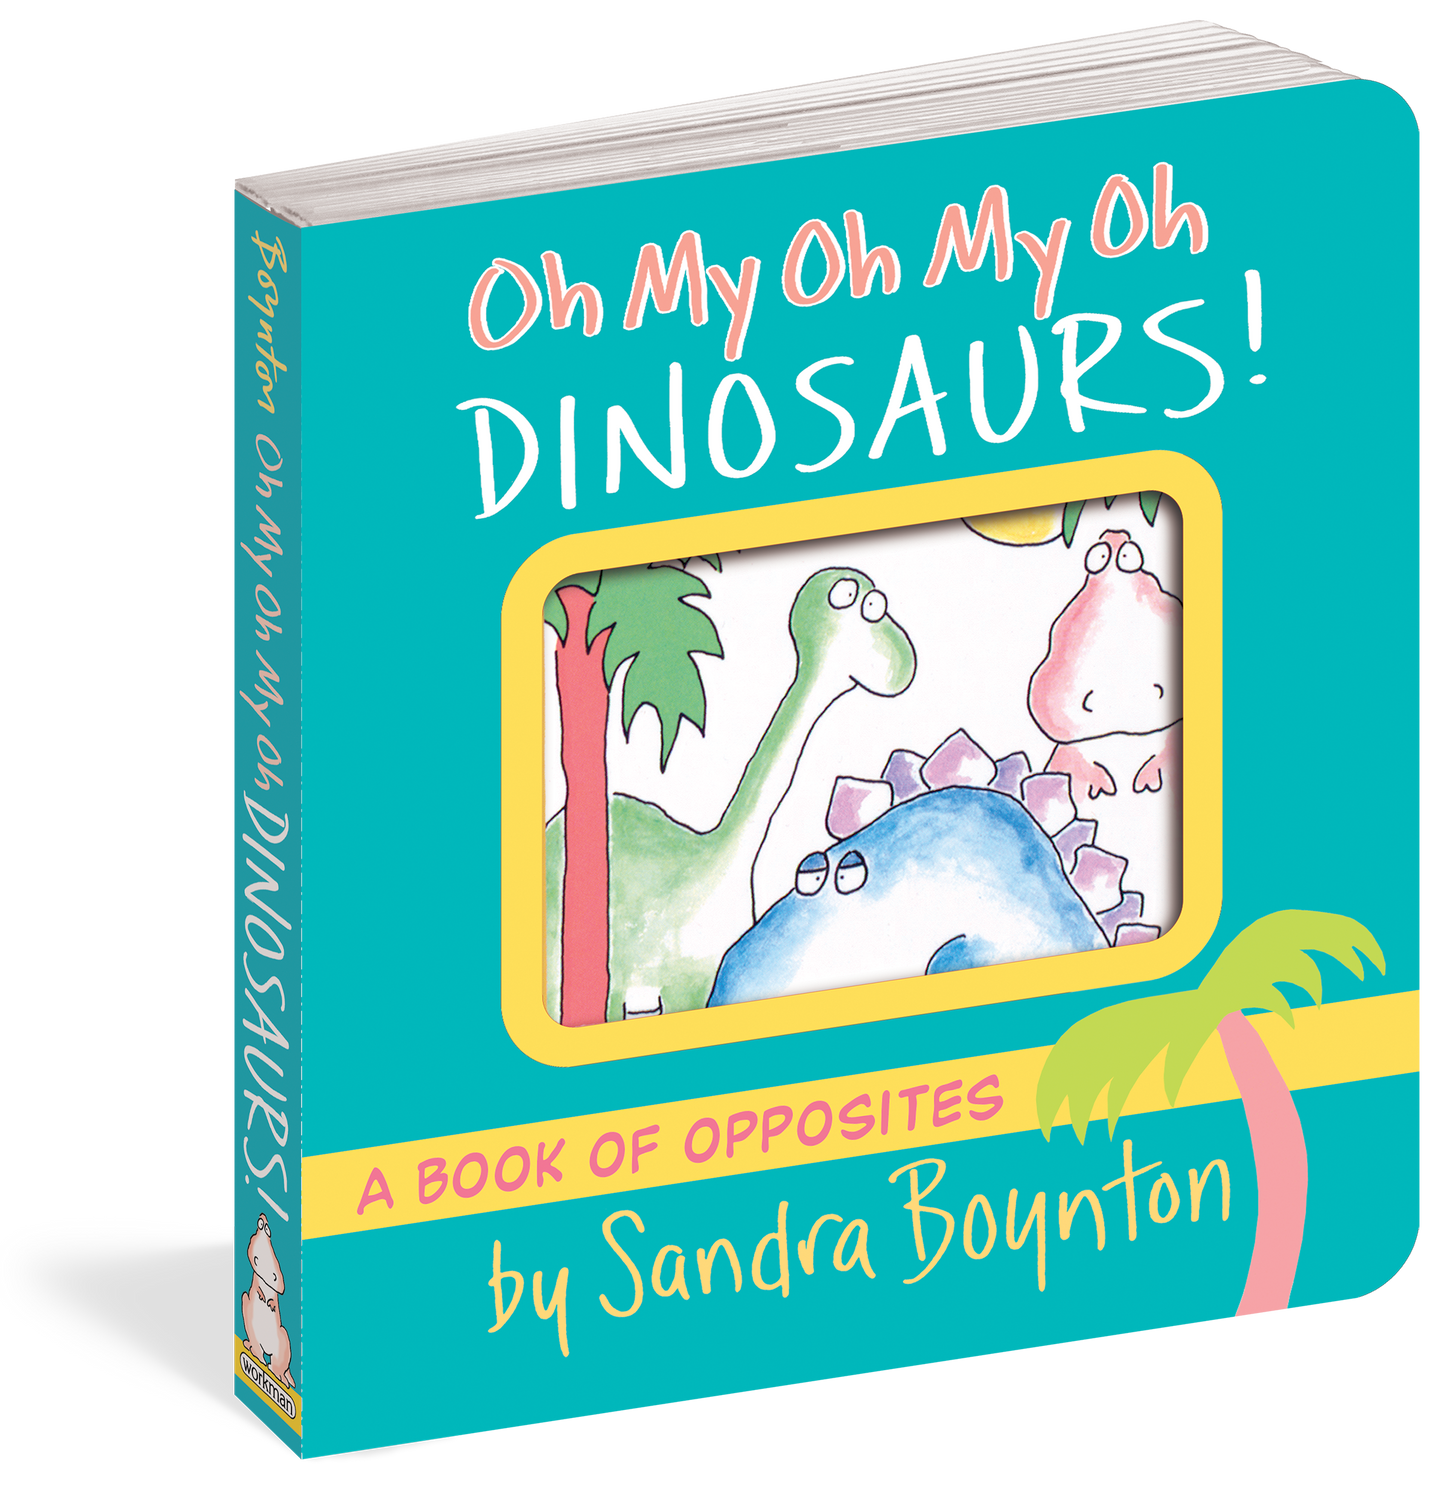 cover of book has a rectangle cut out to see the first page that has three different dinosaurs, title, and author's name